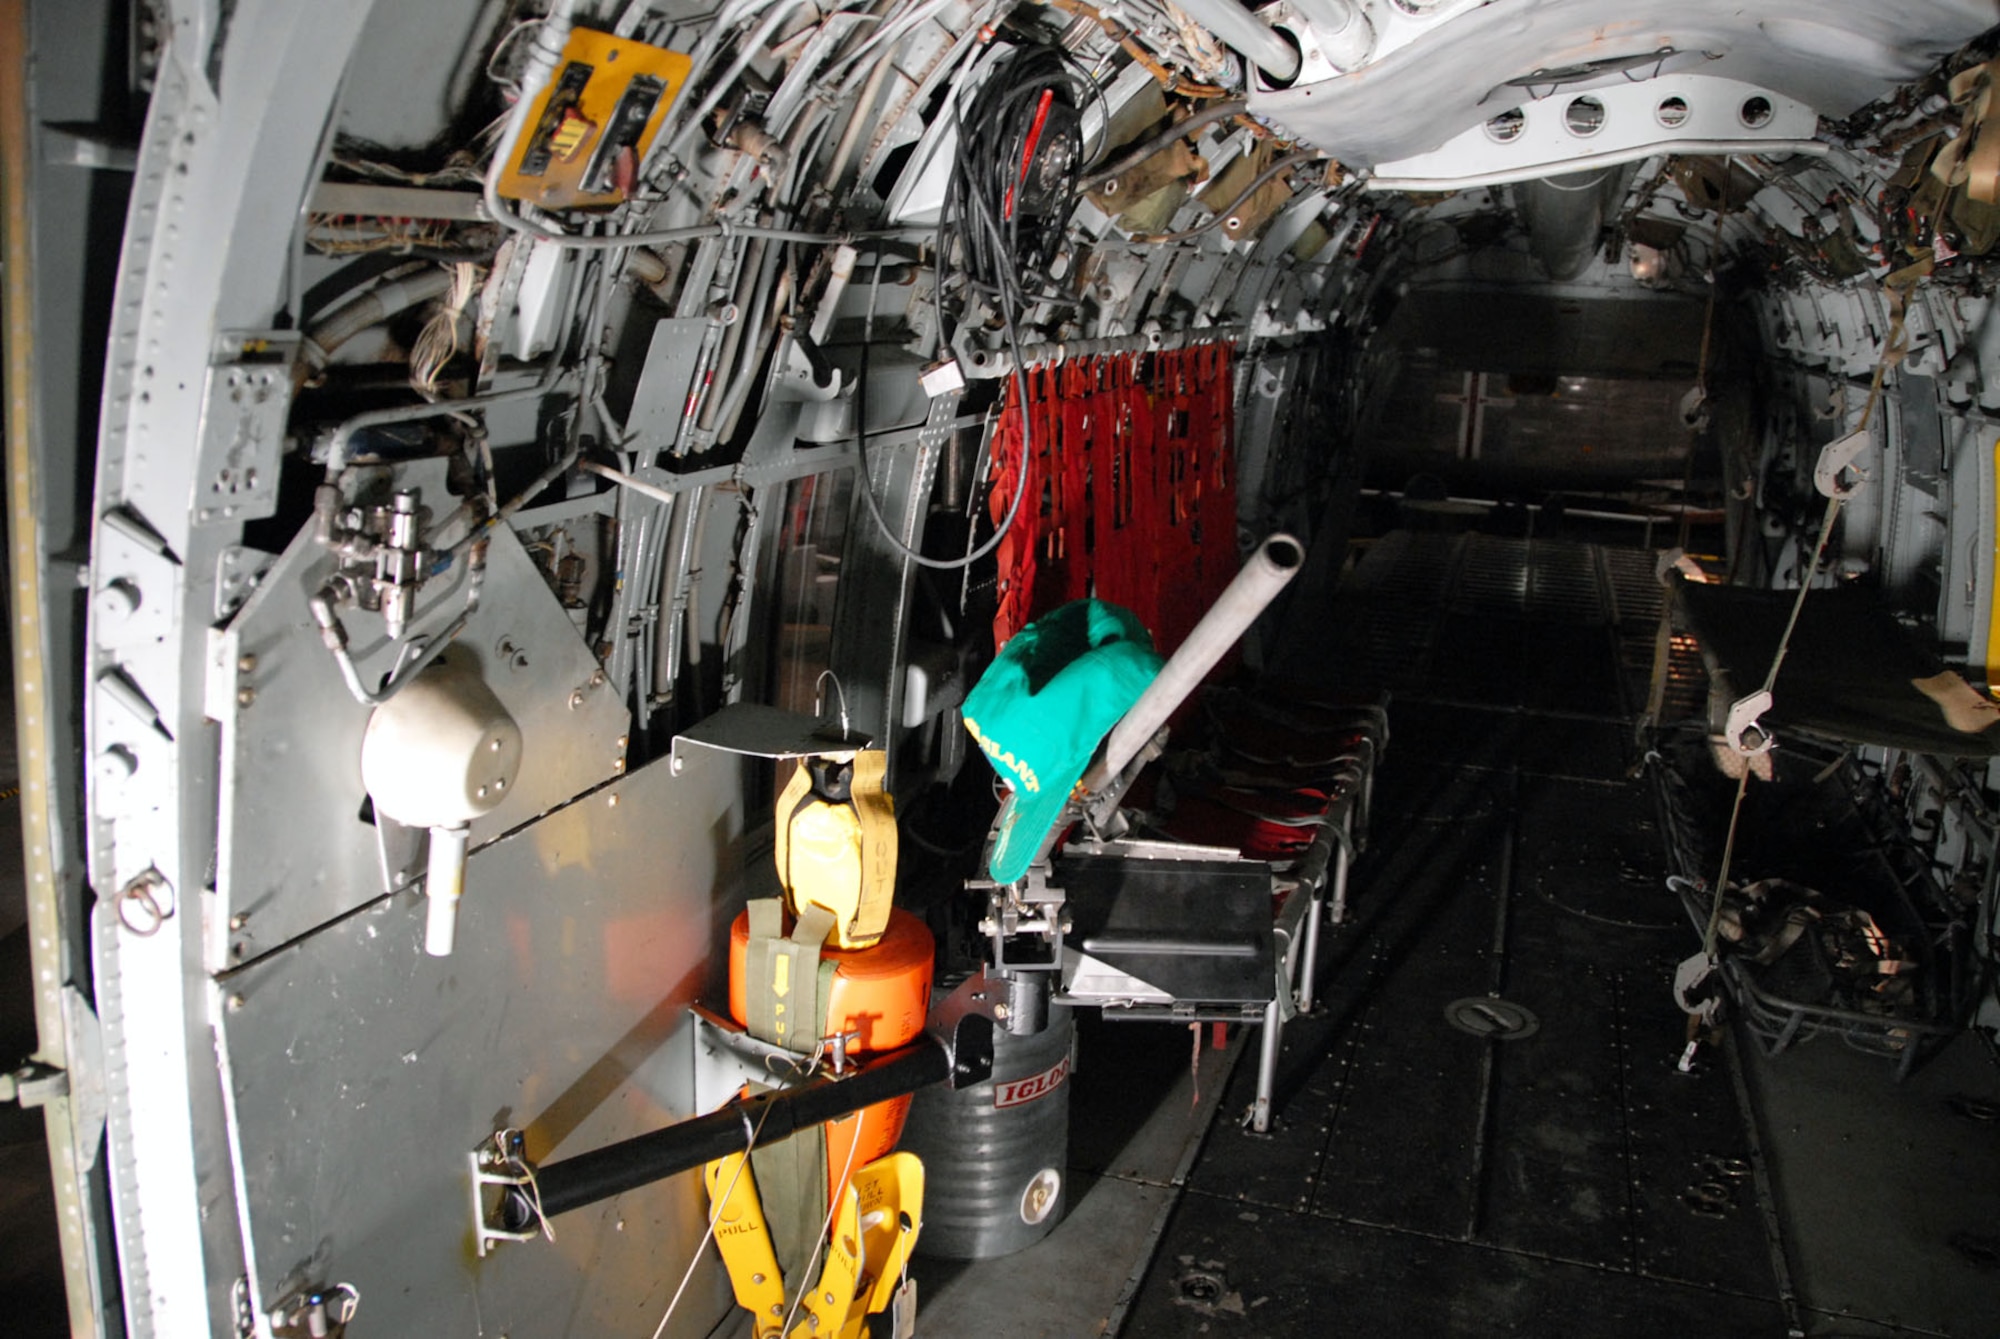 DAYTON, Ohio -- Sikorsky HH-3 interior at the National Museum of the United States Air Force. (U.S. Air Force photo)